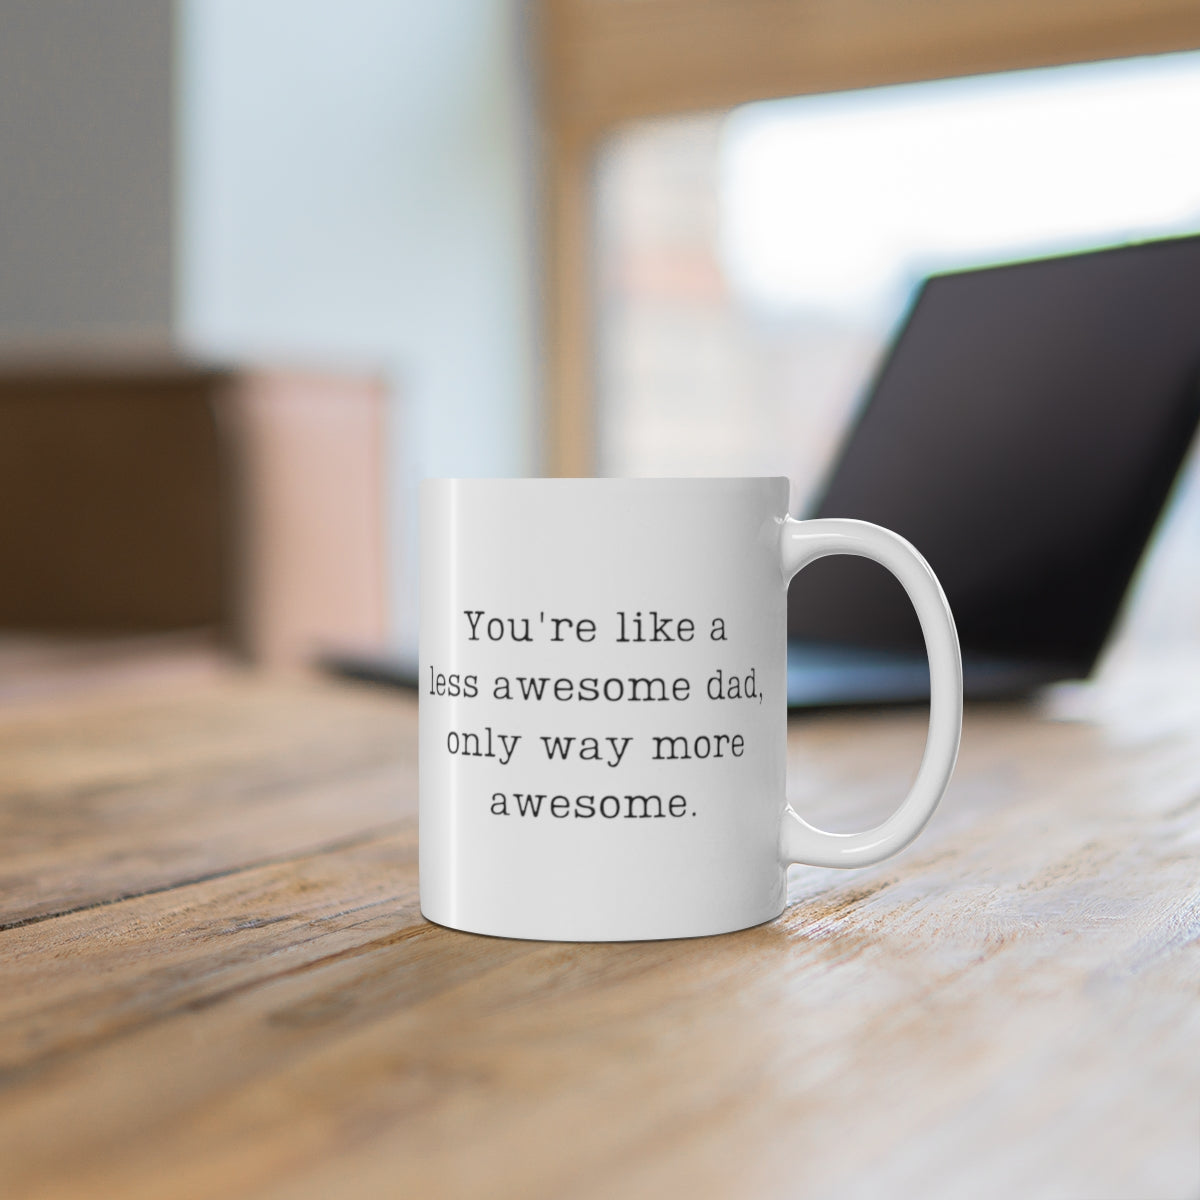 You're Like A Less Awesome Dad, Only Way More Awesome | Funny, Snarky Gift | White Ceramic Mug, Typewriter Font